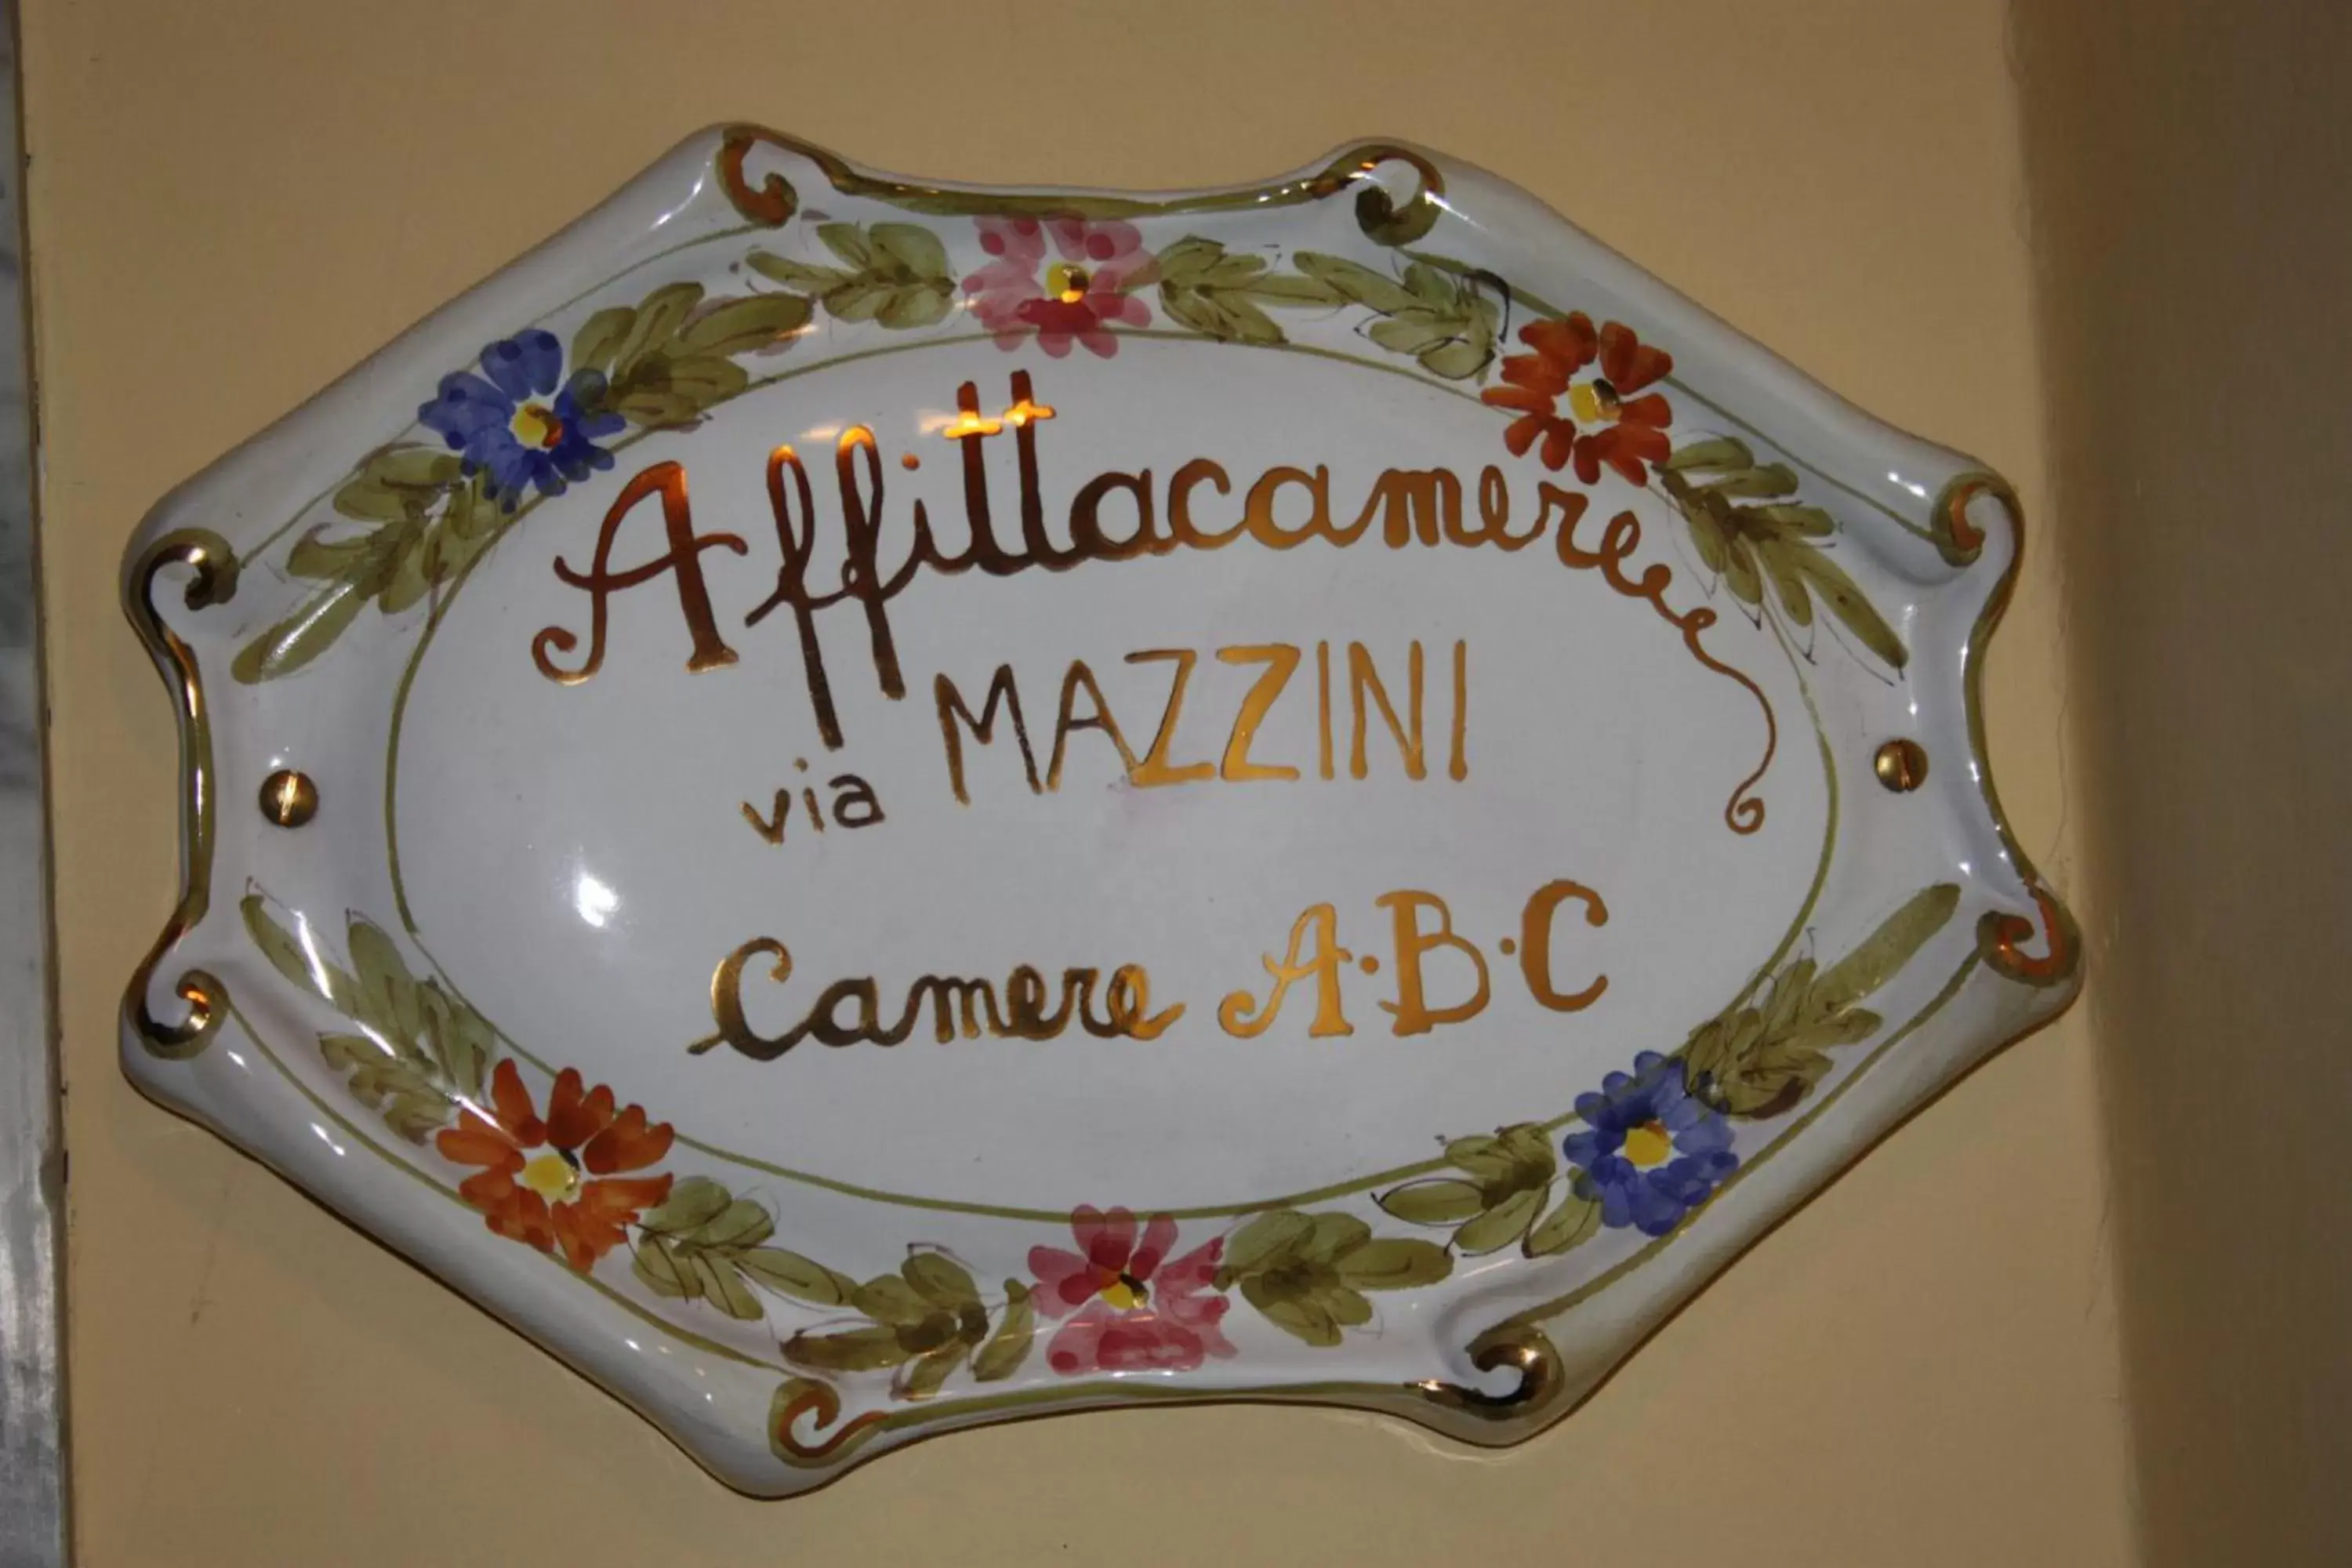 Other in Affittacamere Via Mazzini